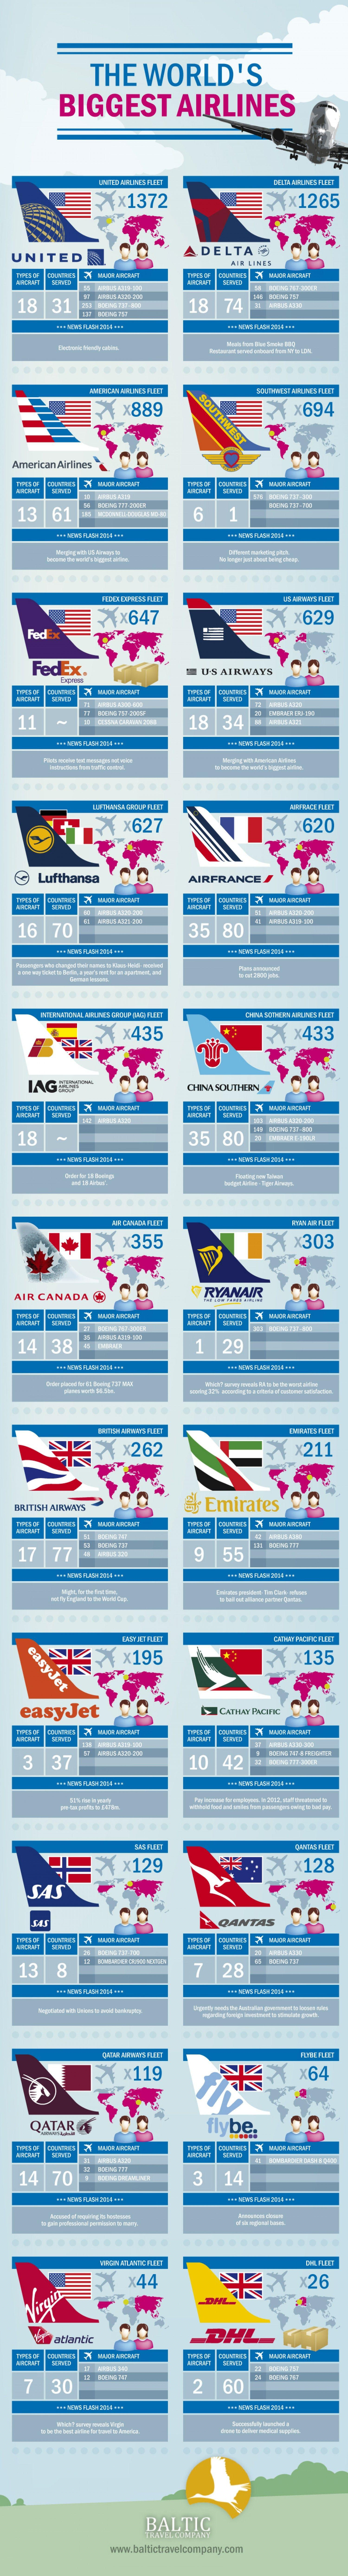 World's Largest Airline Logo - 22 of the World's Biggest Airlines Compared | Aviation Infographics ...